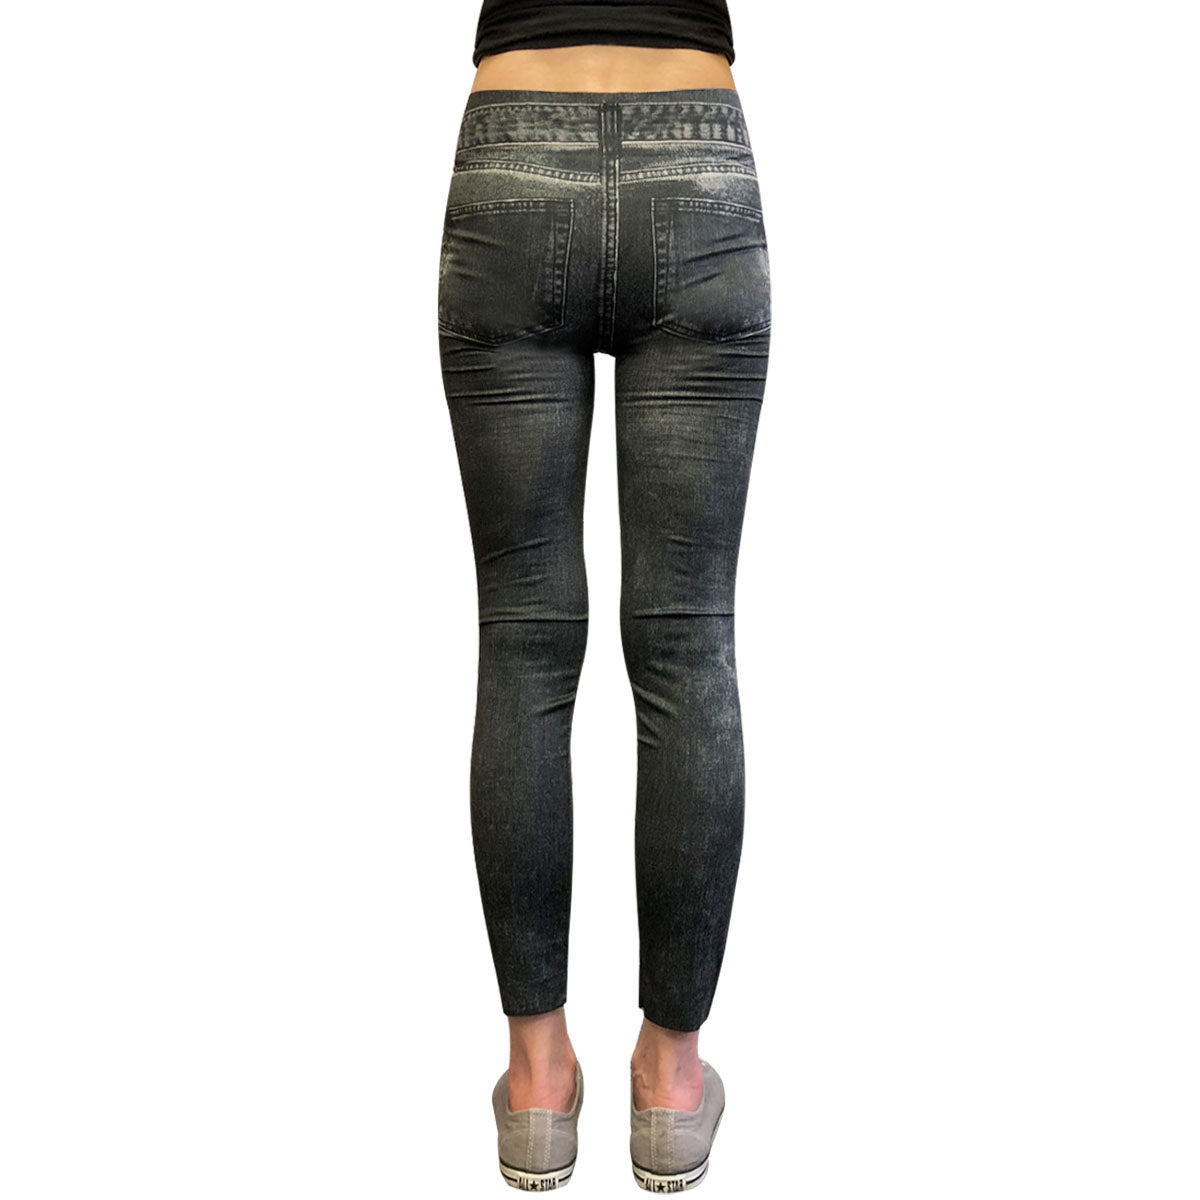 Women's Denim Print Fake Jeans Look Like Leggings Sexy Stretchy High  Workout Leggings for Women Plus Size at Amazon Women's Clothing store